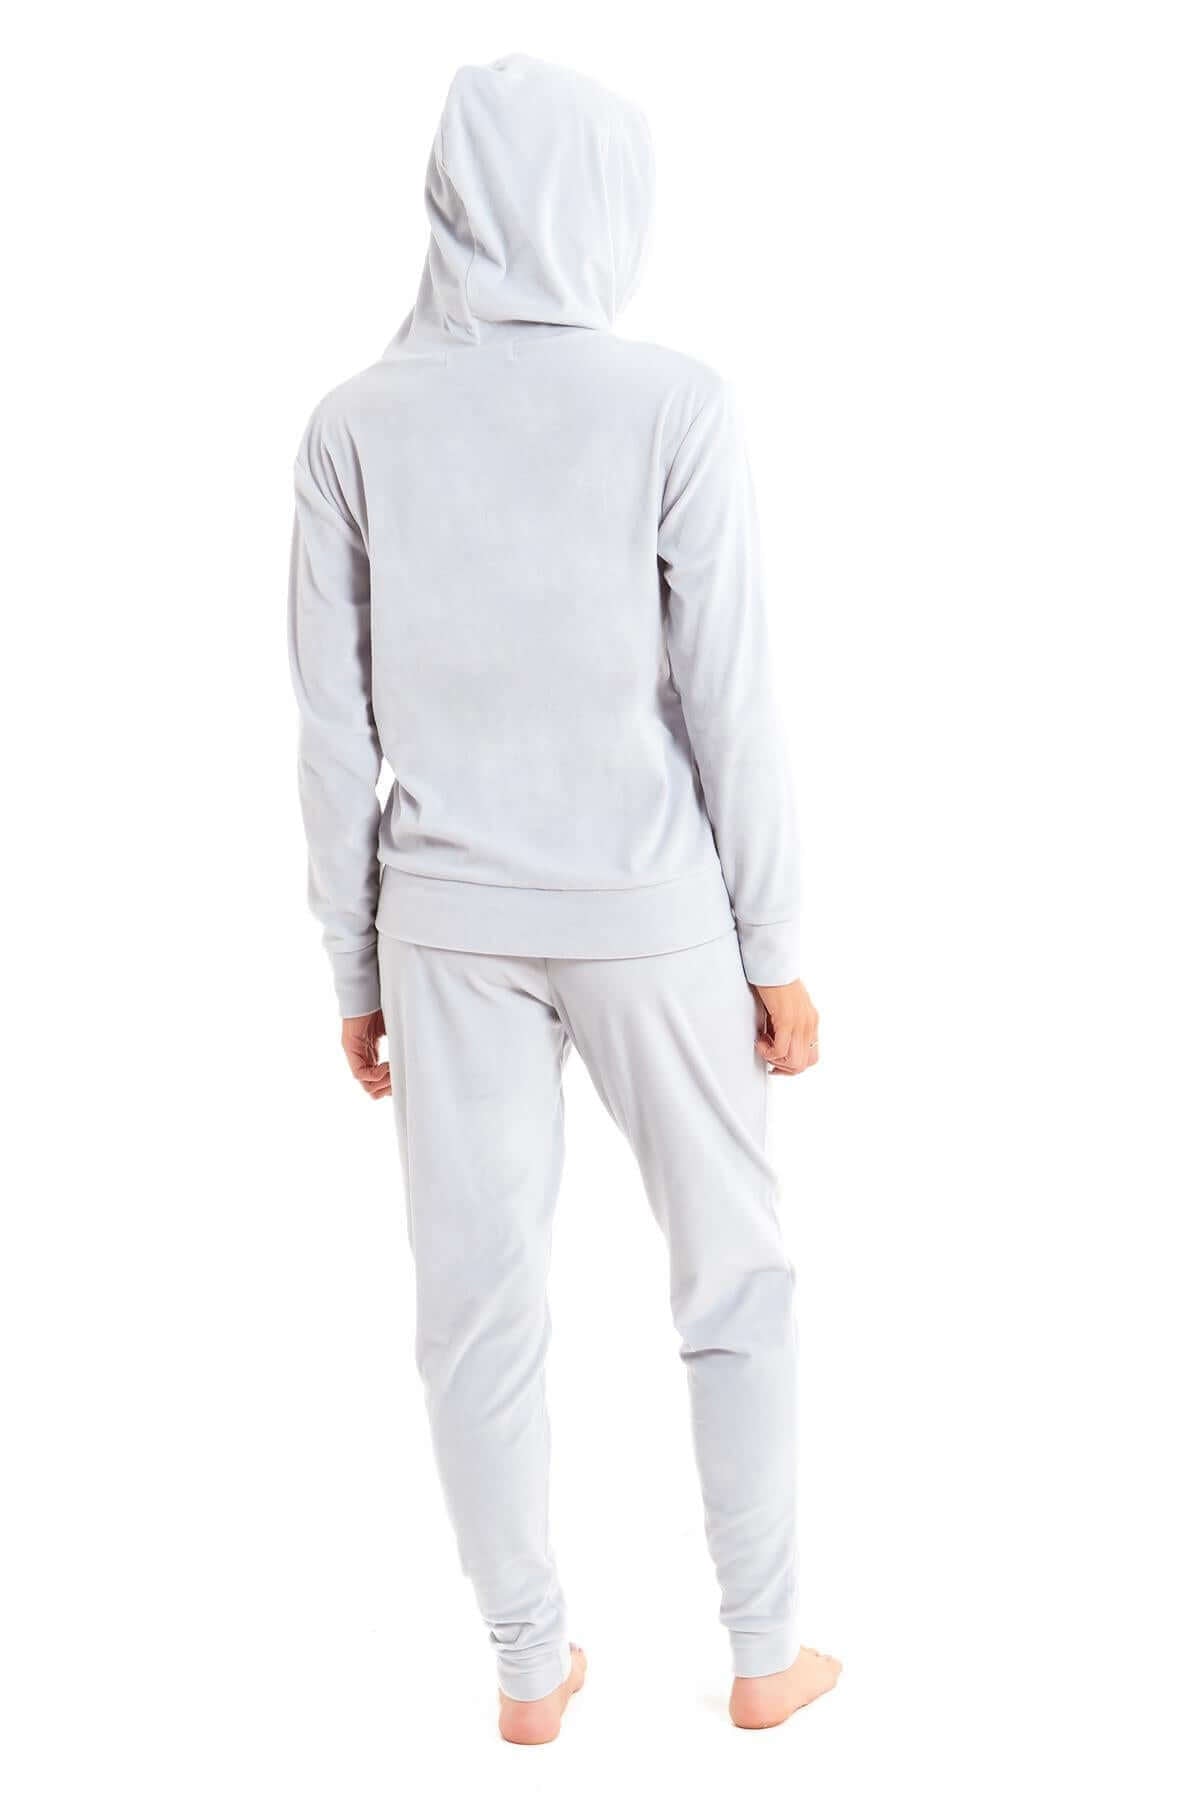 Women's Hooded Velour Zipped Track Suit Pyjama Loungewear Velvet Sets. Buy now for £20.00. A Pyjamas by Daisy Dreamer. 12-14, 14-16, 16-18, 18-20, 20-22, 8-10, bridesmaid, comfortable, daisy dreamer, elasticated, girls, gym, hoodie, hotel, large, loungewe